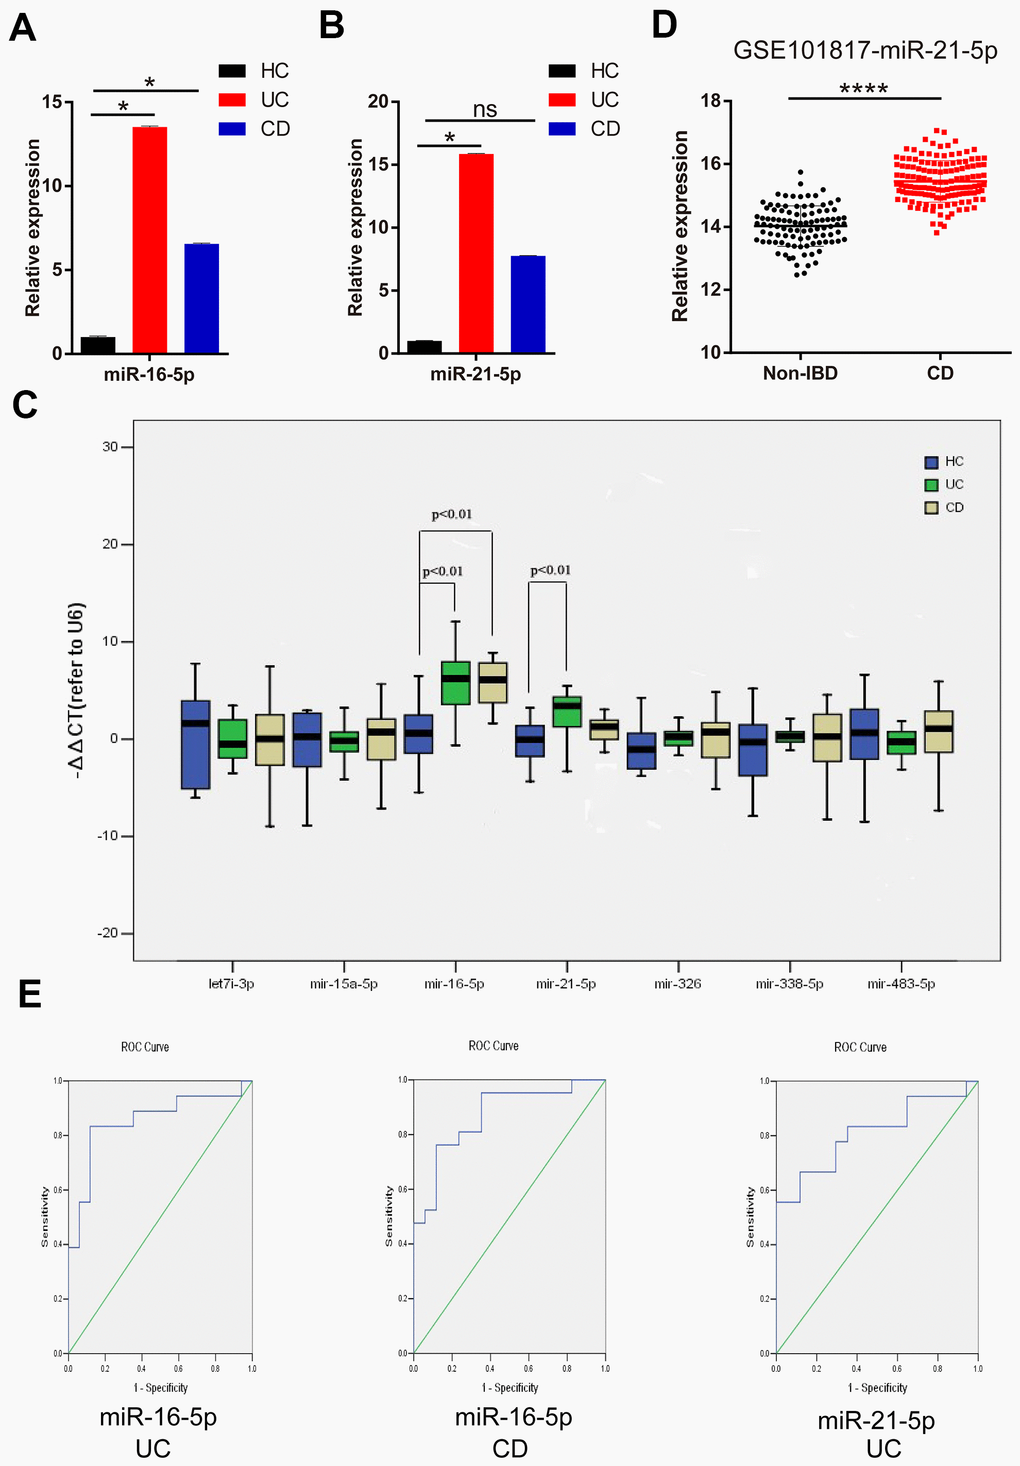 MiR-21-5p and miR-16-5p are potential noninvasive feces markers for IBD. (A) Expression of miR-16-5p in fecal specimens from HC, UC, and CD. (B) Expression of miR-21-5p in fecal specimens from HC, UC, and CD. (C) Expression of seven candidate DEMs (let-7i-3p, miR-15a-5p, miR-16-5p, miR-21-5p, miR-326, miR-338-5p and miR-483-5p) in fecal specimens from HC, UC and CD. (D) Compared with normal intestinal mucosa tissue based on GSE101817, the expression of miR-21-5p in the intestinal mucosa of CD patients was up-regulated. (E) Diagnostic value of miR-16-5p and miR-21-5p in fecal specimens of IBD patients was evaluated by ROC curves. *p 